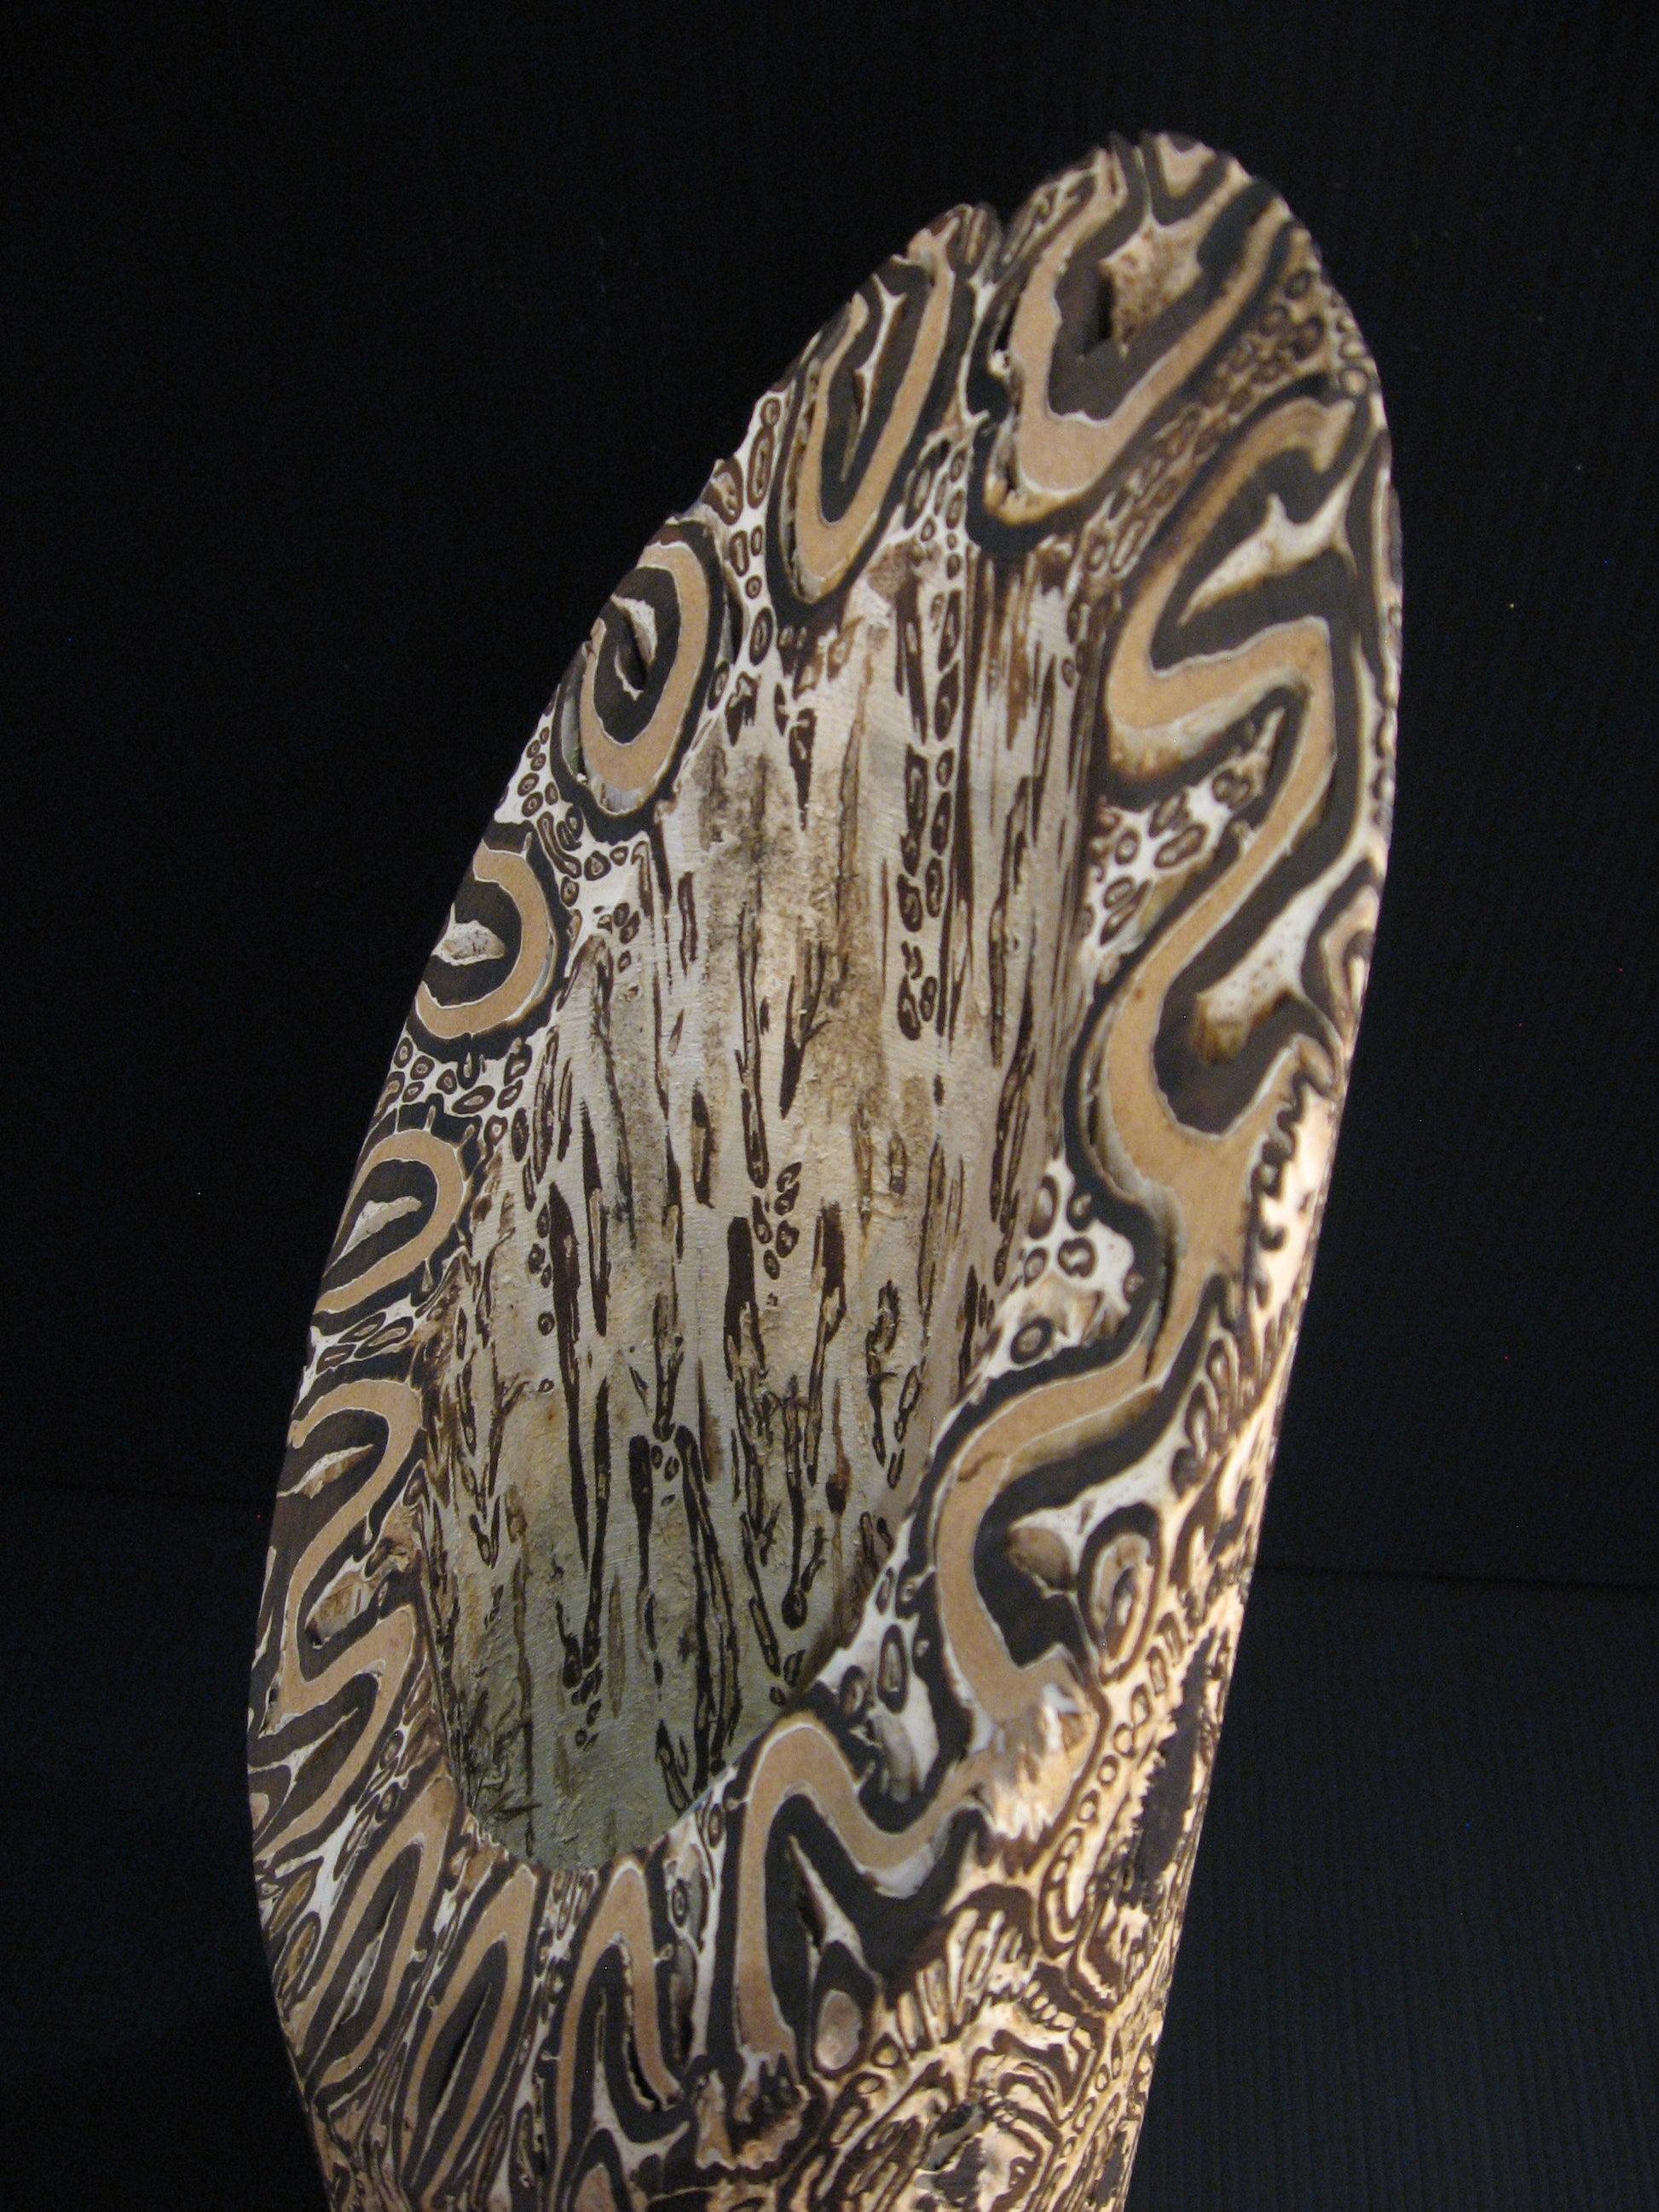 Detail of Ponga Wooden Vase New Zealand Native Wood by Fernwood Silver Fern Gallery